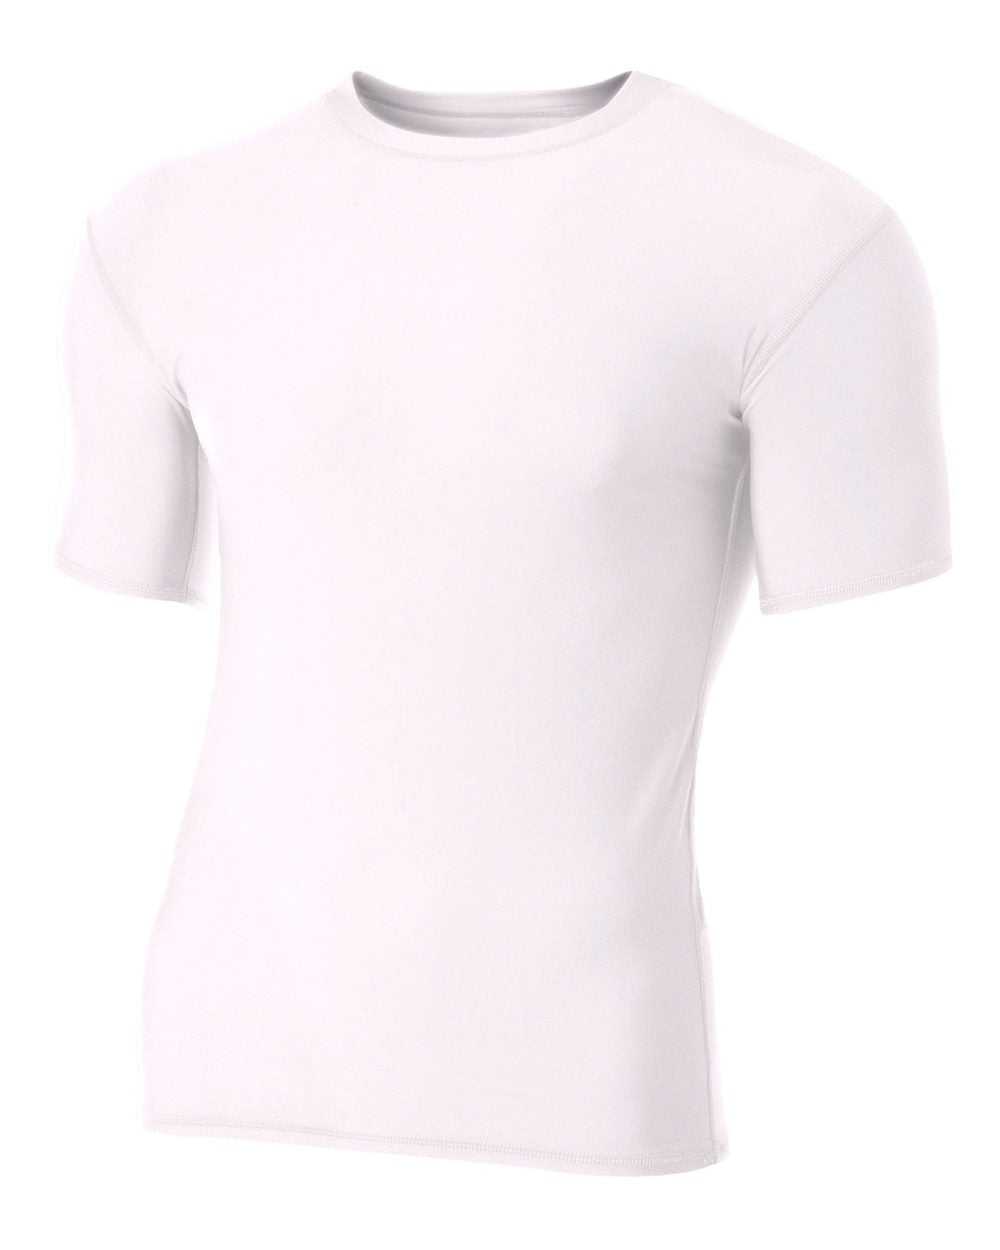 A4 N3130 Short Sleeve Compression Crew - White - HIT a Double